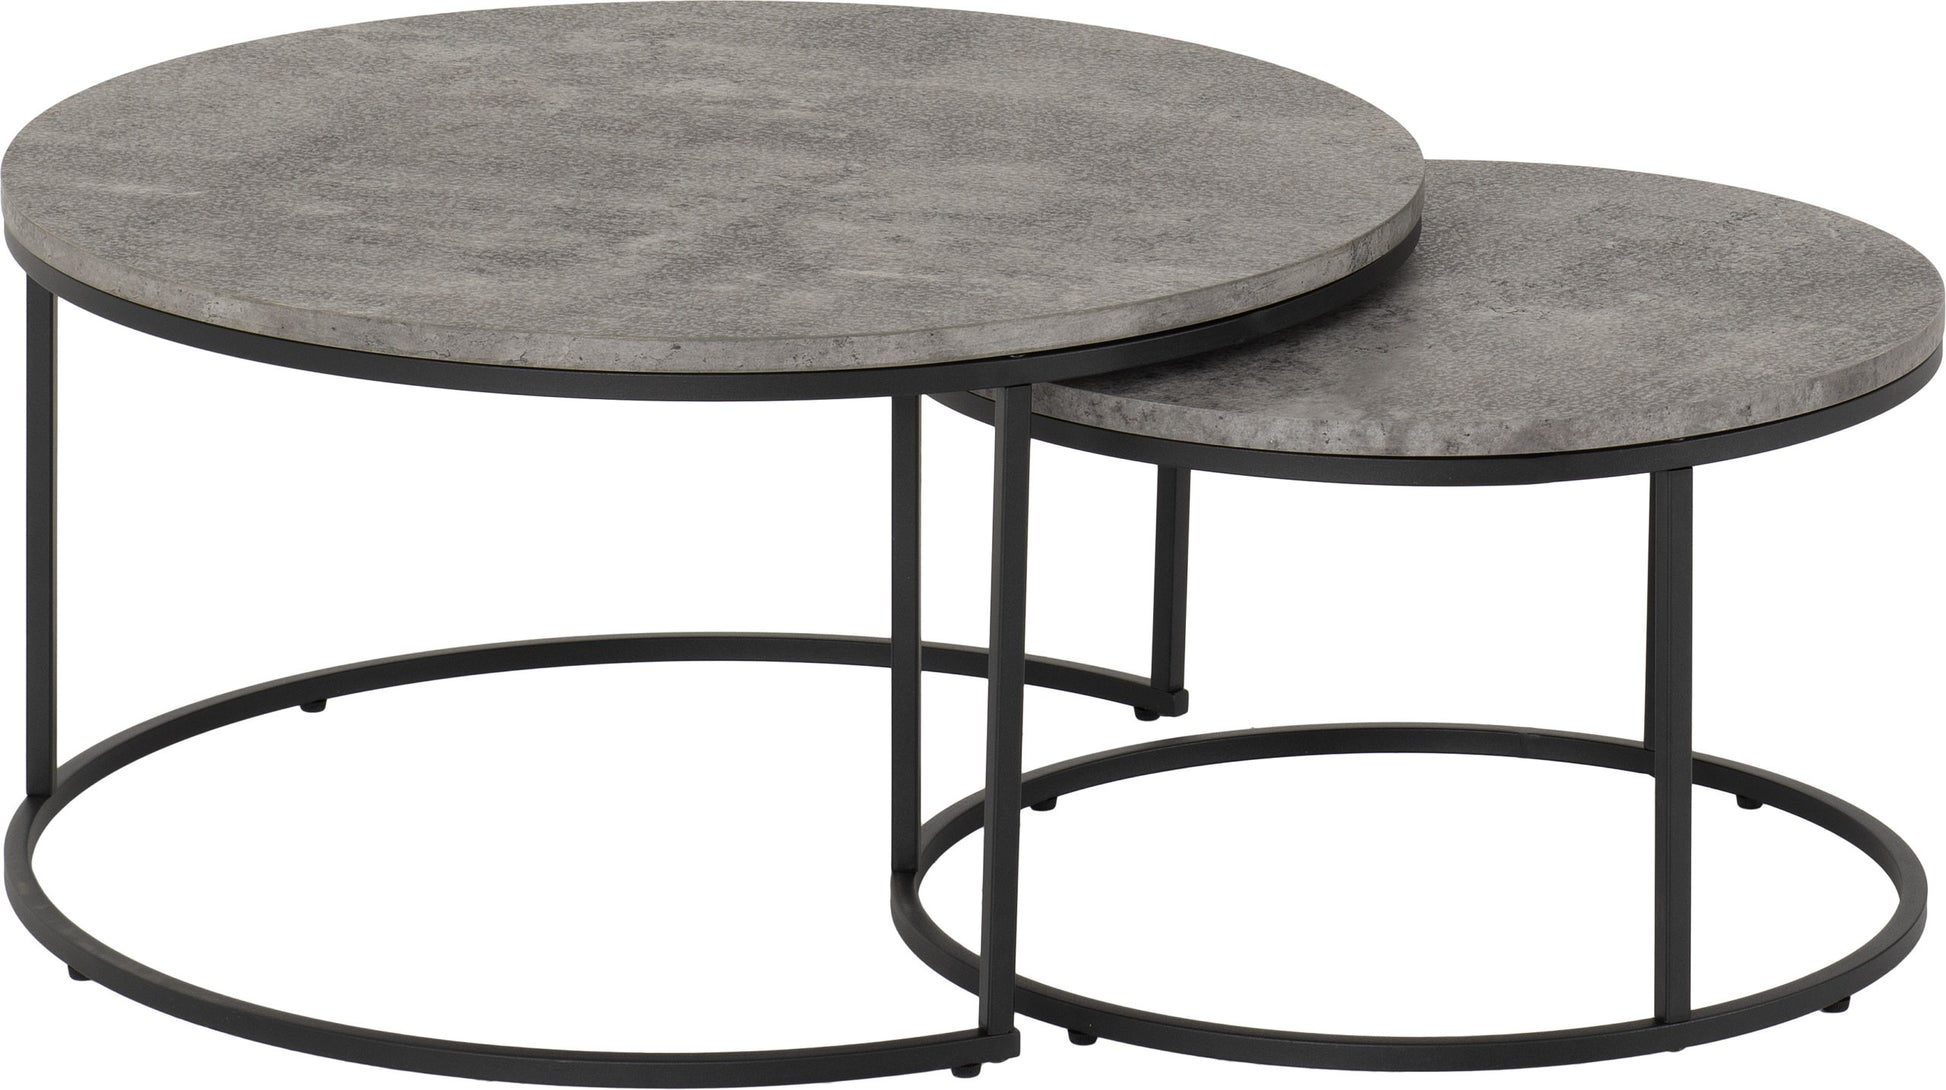 Athens Round Coffee Table Set- Concrete Effect/Black- The Right Buy Store